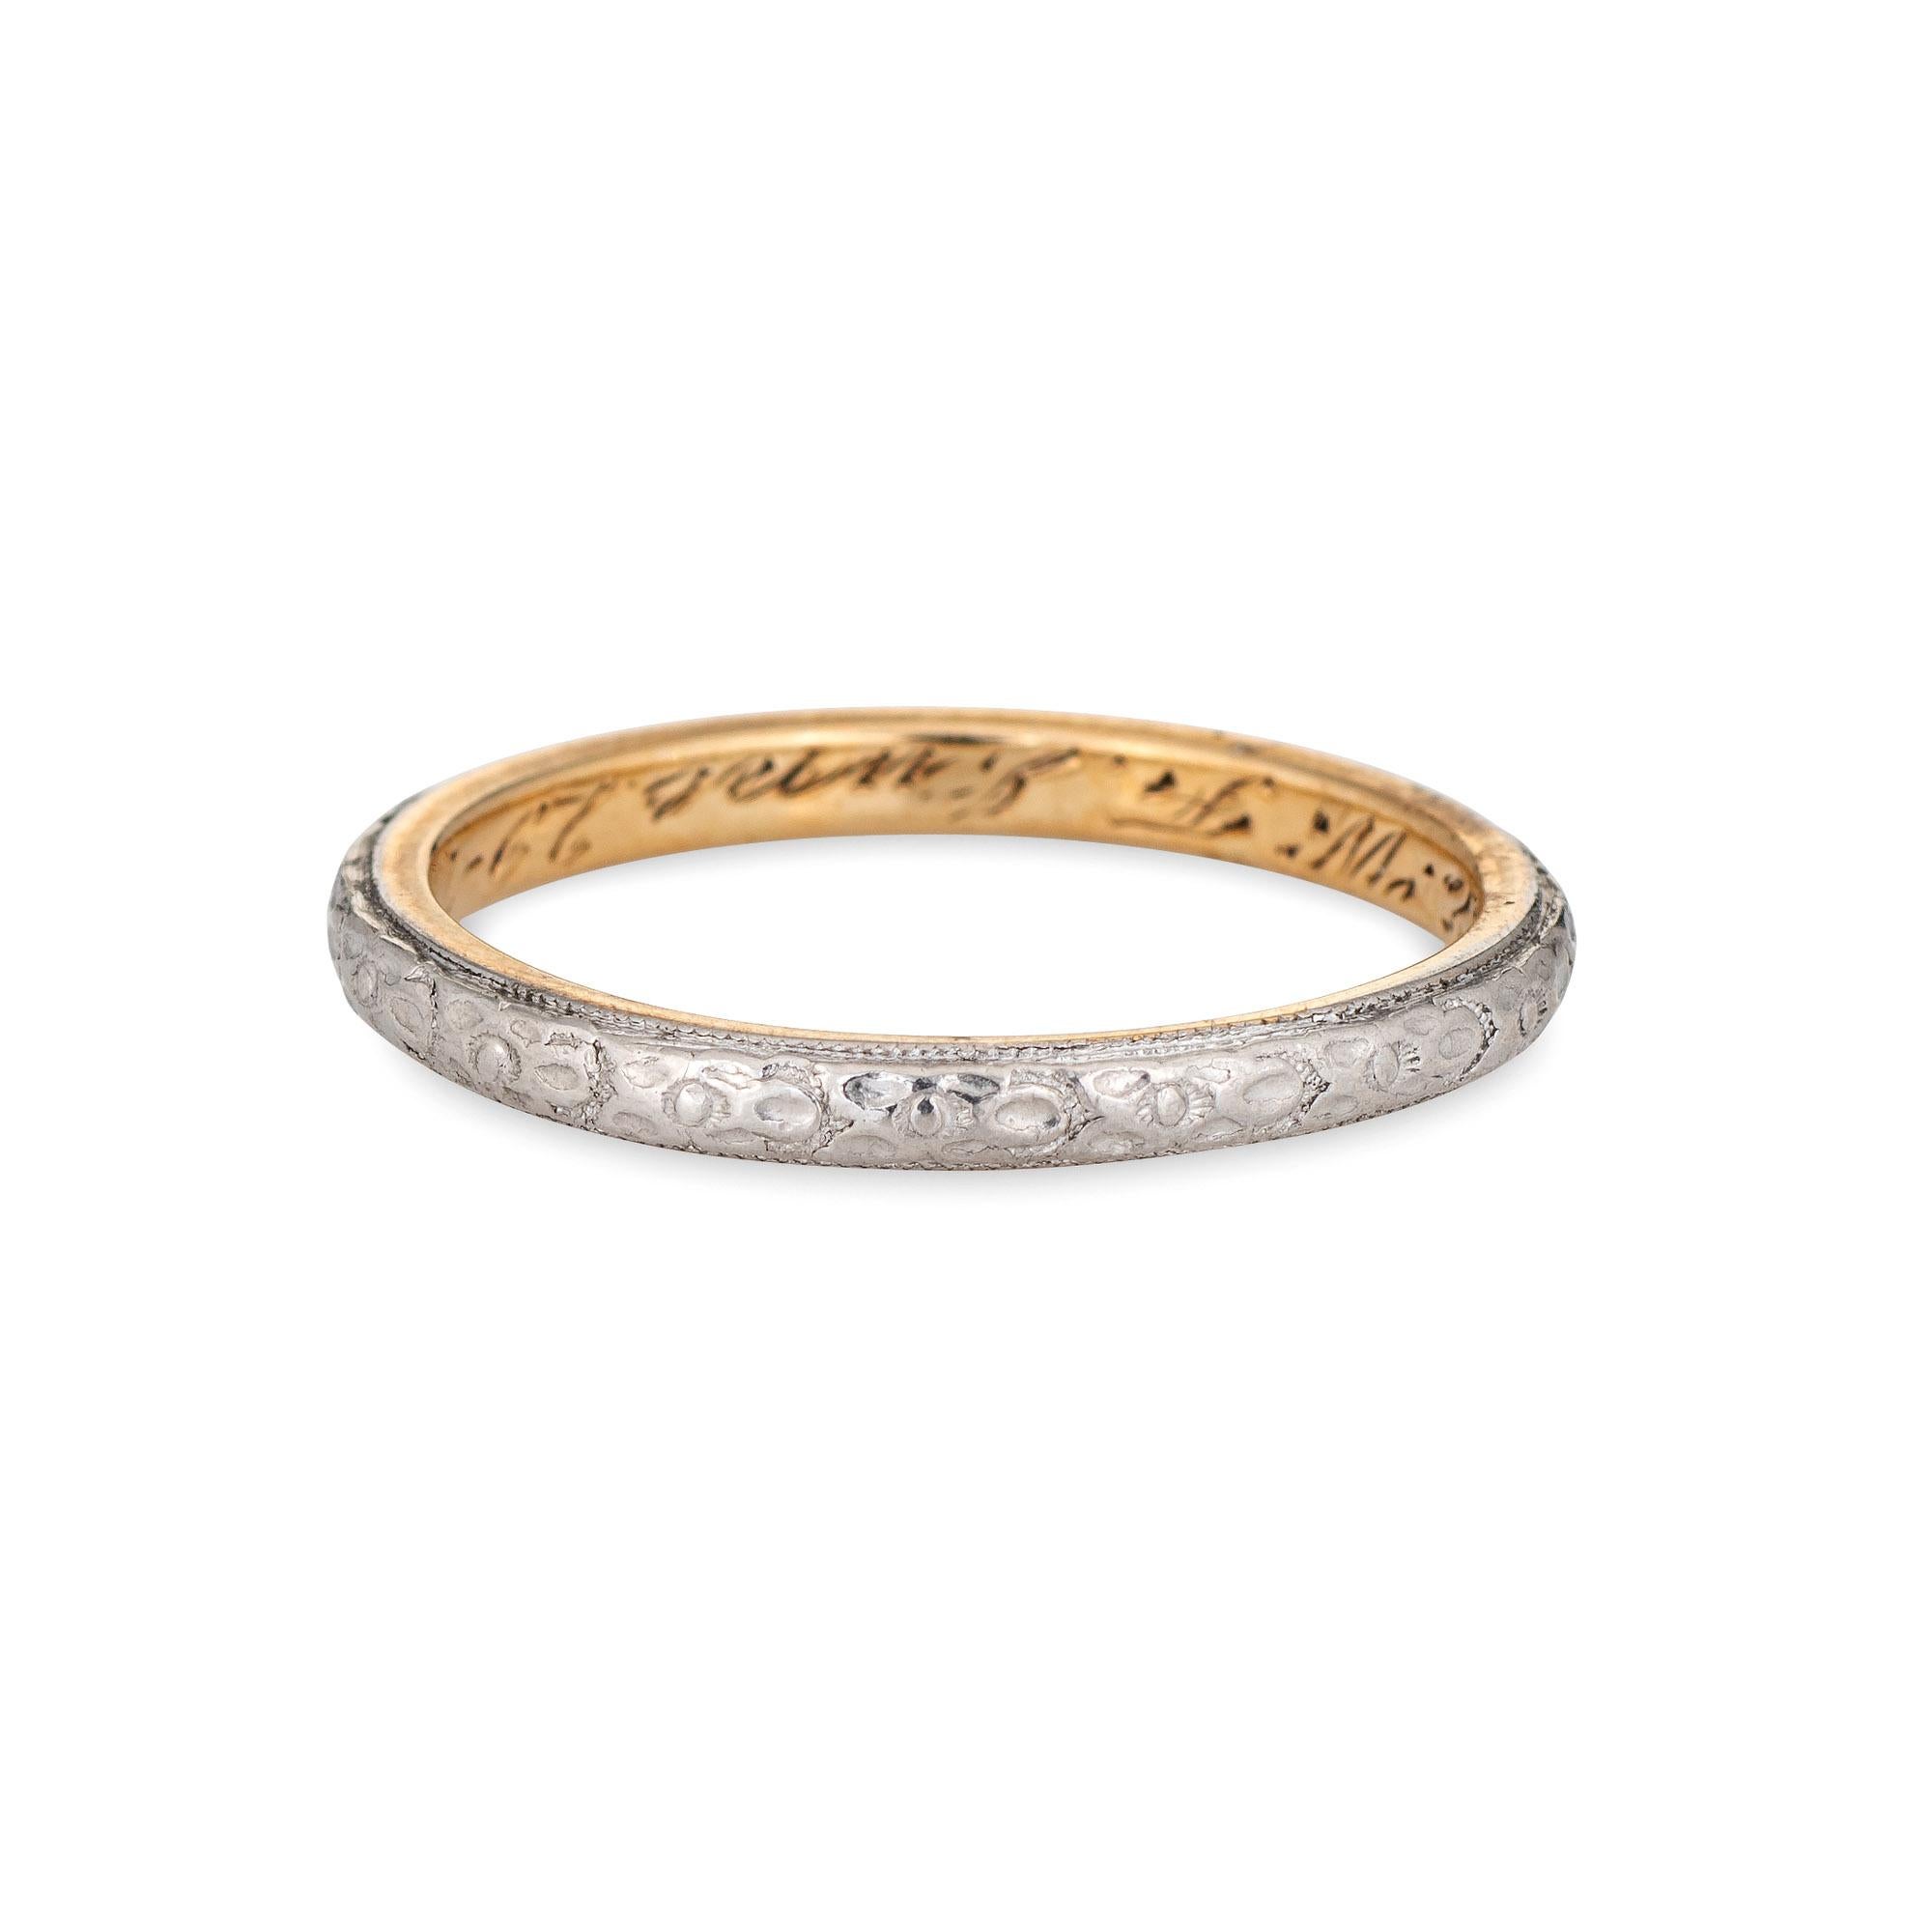 Finely detailed antique Edwardian era wedding band (circa 1914) crafted in platinum & 14k yellow gold. 

The charming Edwardian era ring features a flower pattern, continuous around the band. The ring would make a lovely vintage alternative wedding